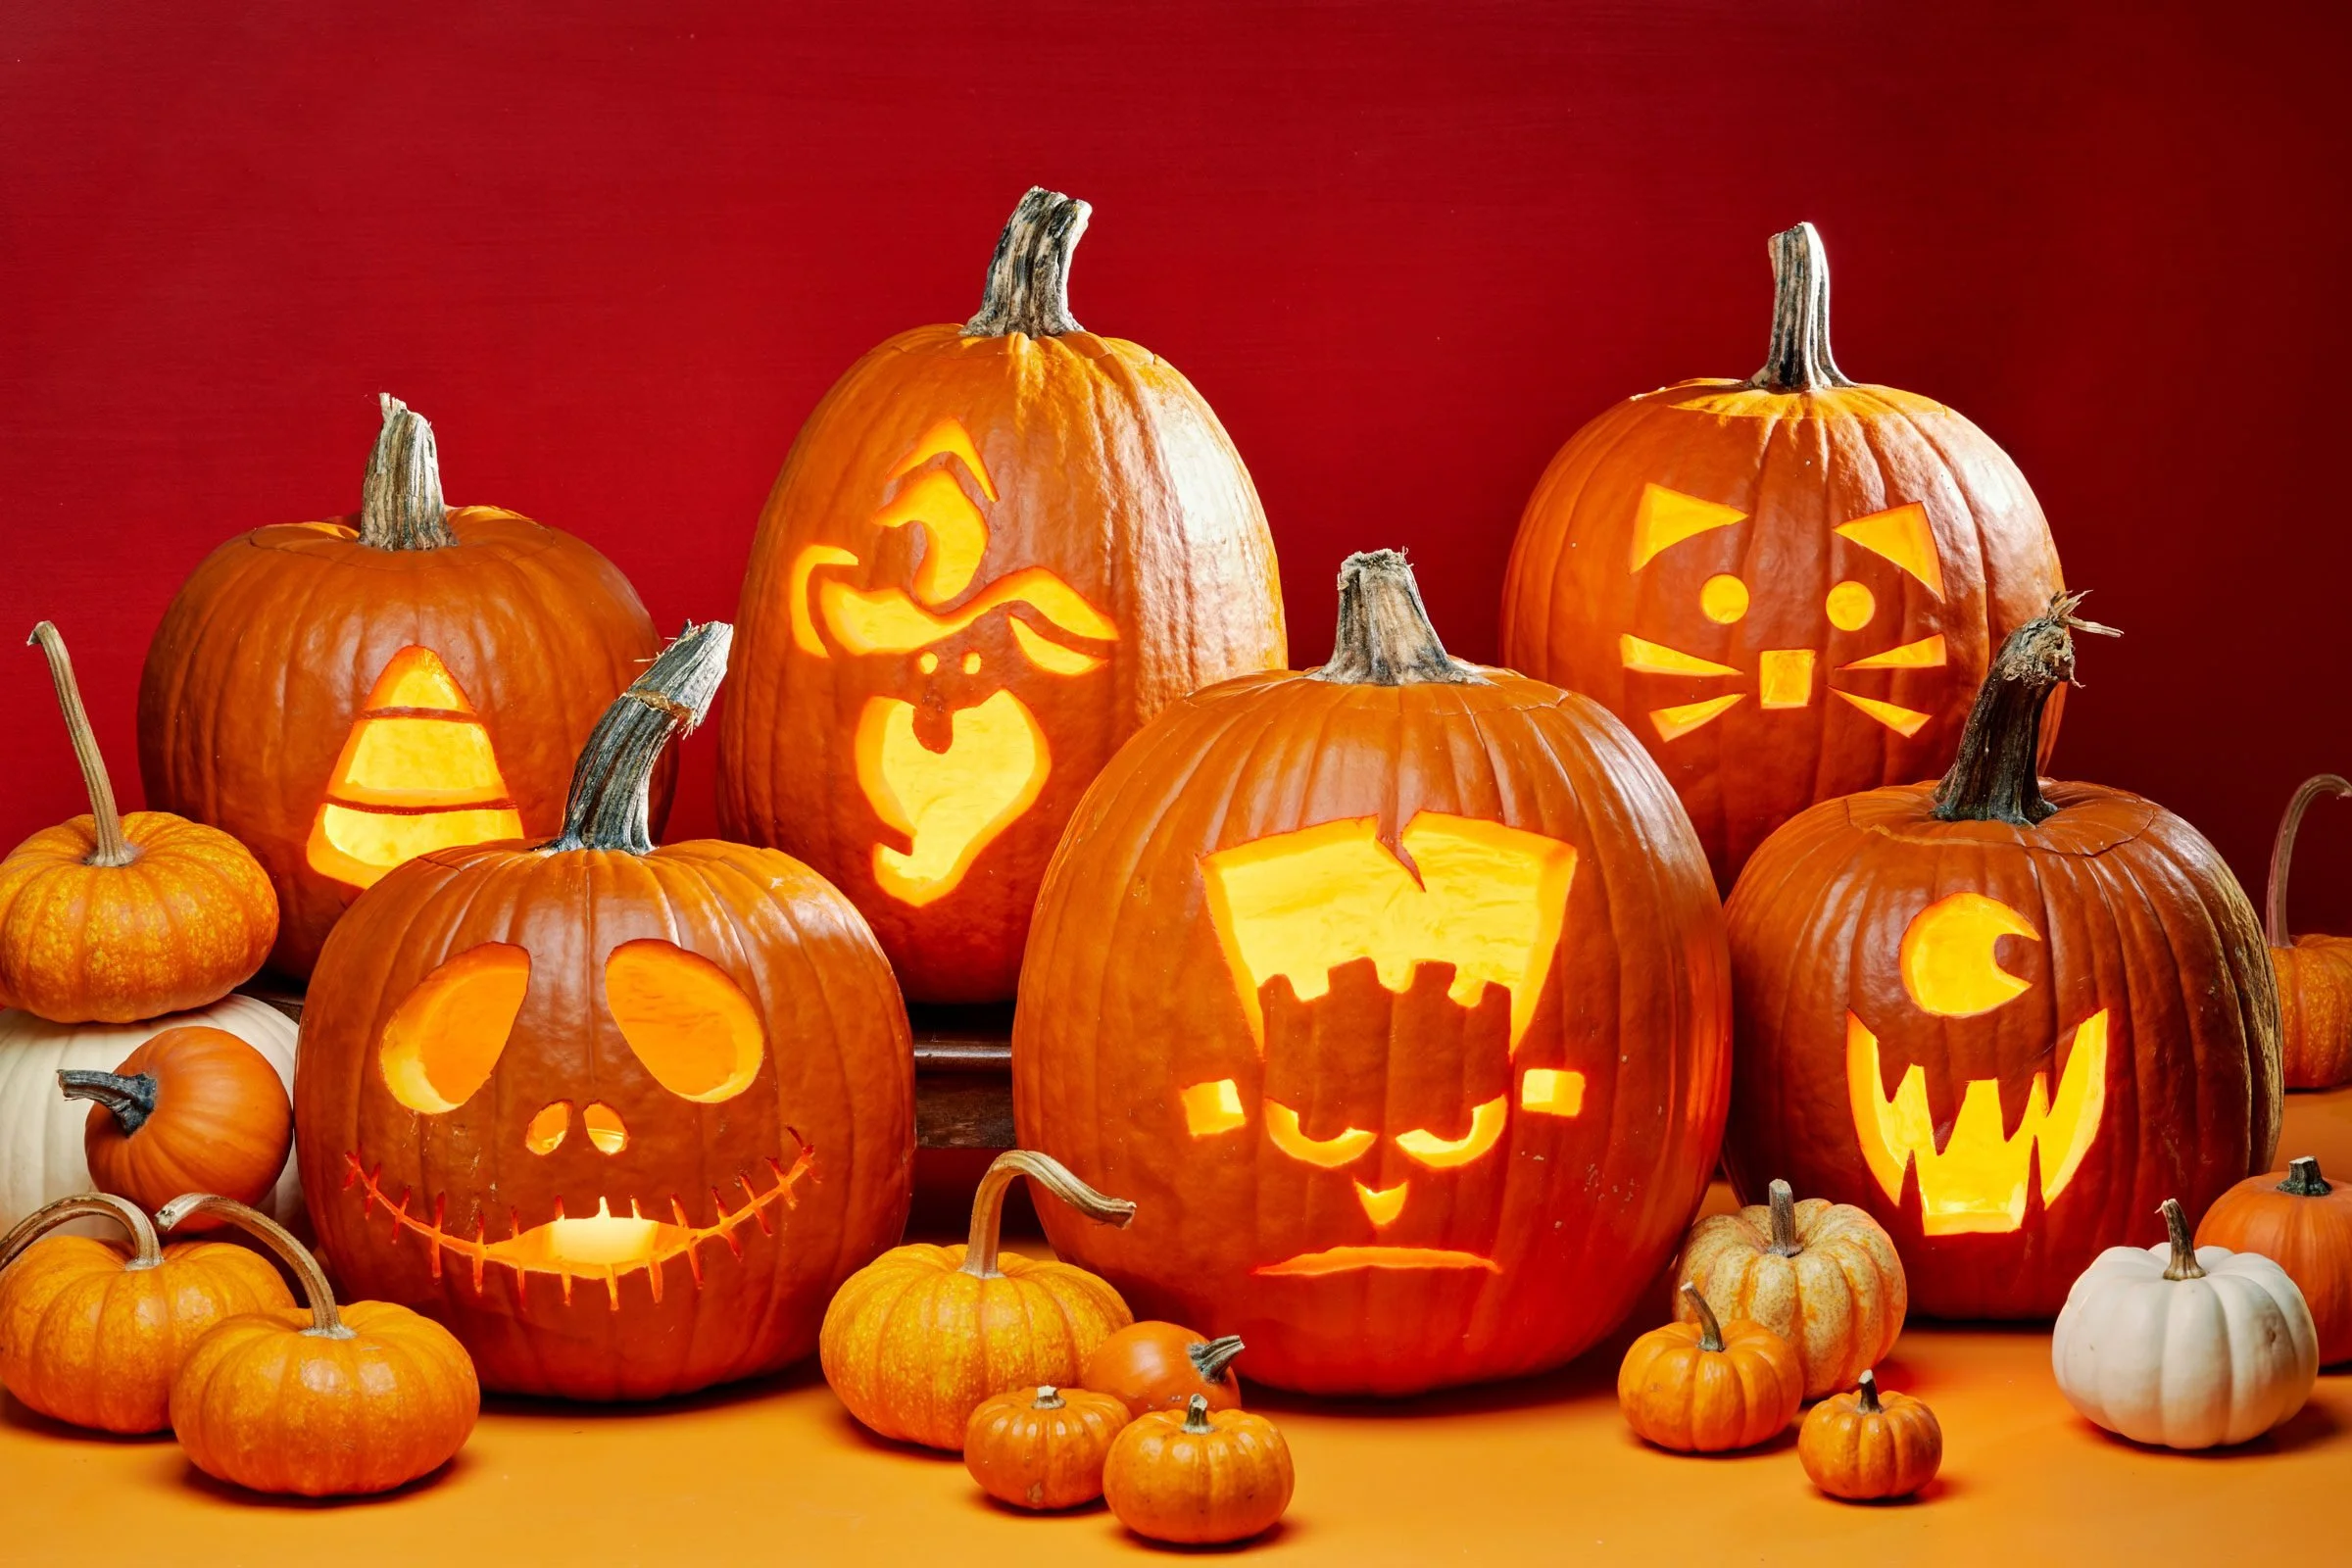 50 Best pumpkin carving ideas for Halloween and What type of pumpkin is used for Halloween?